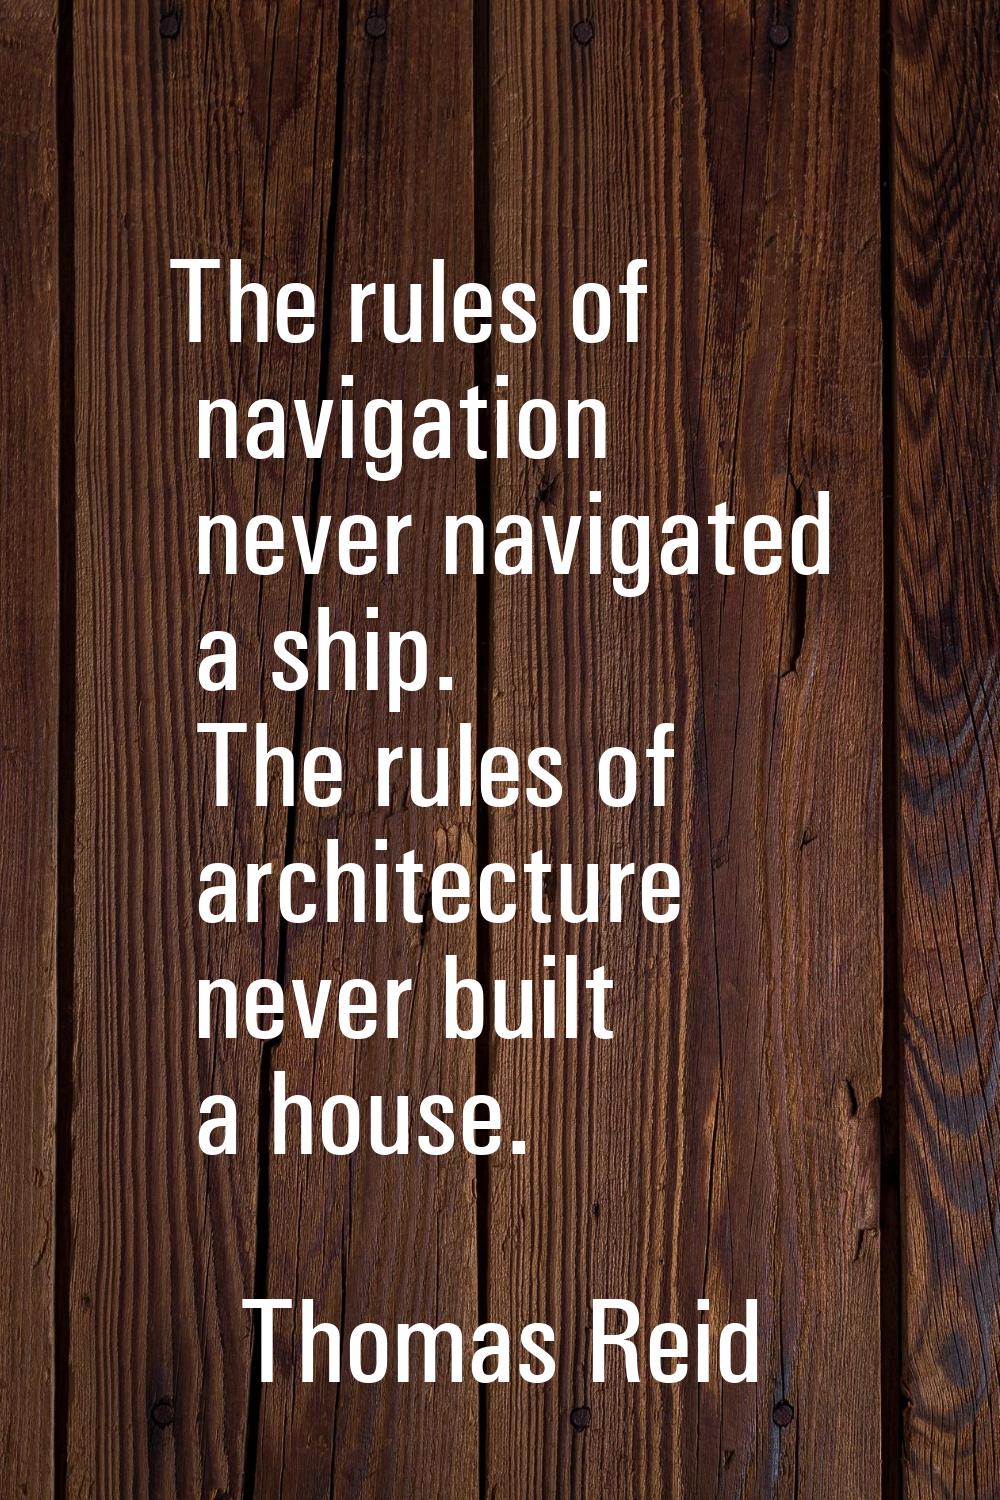 The rules of navigation never navigated a ship. The rules of architecture never built a house.